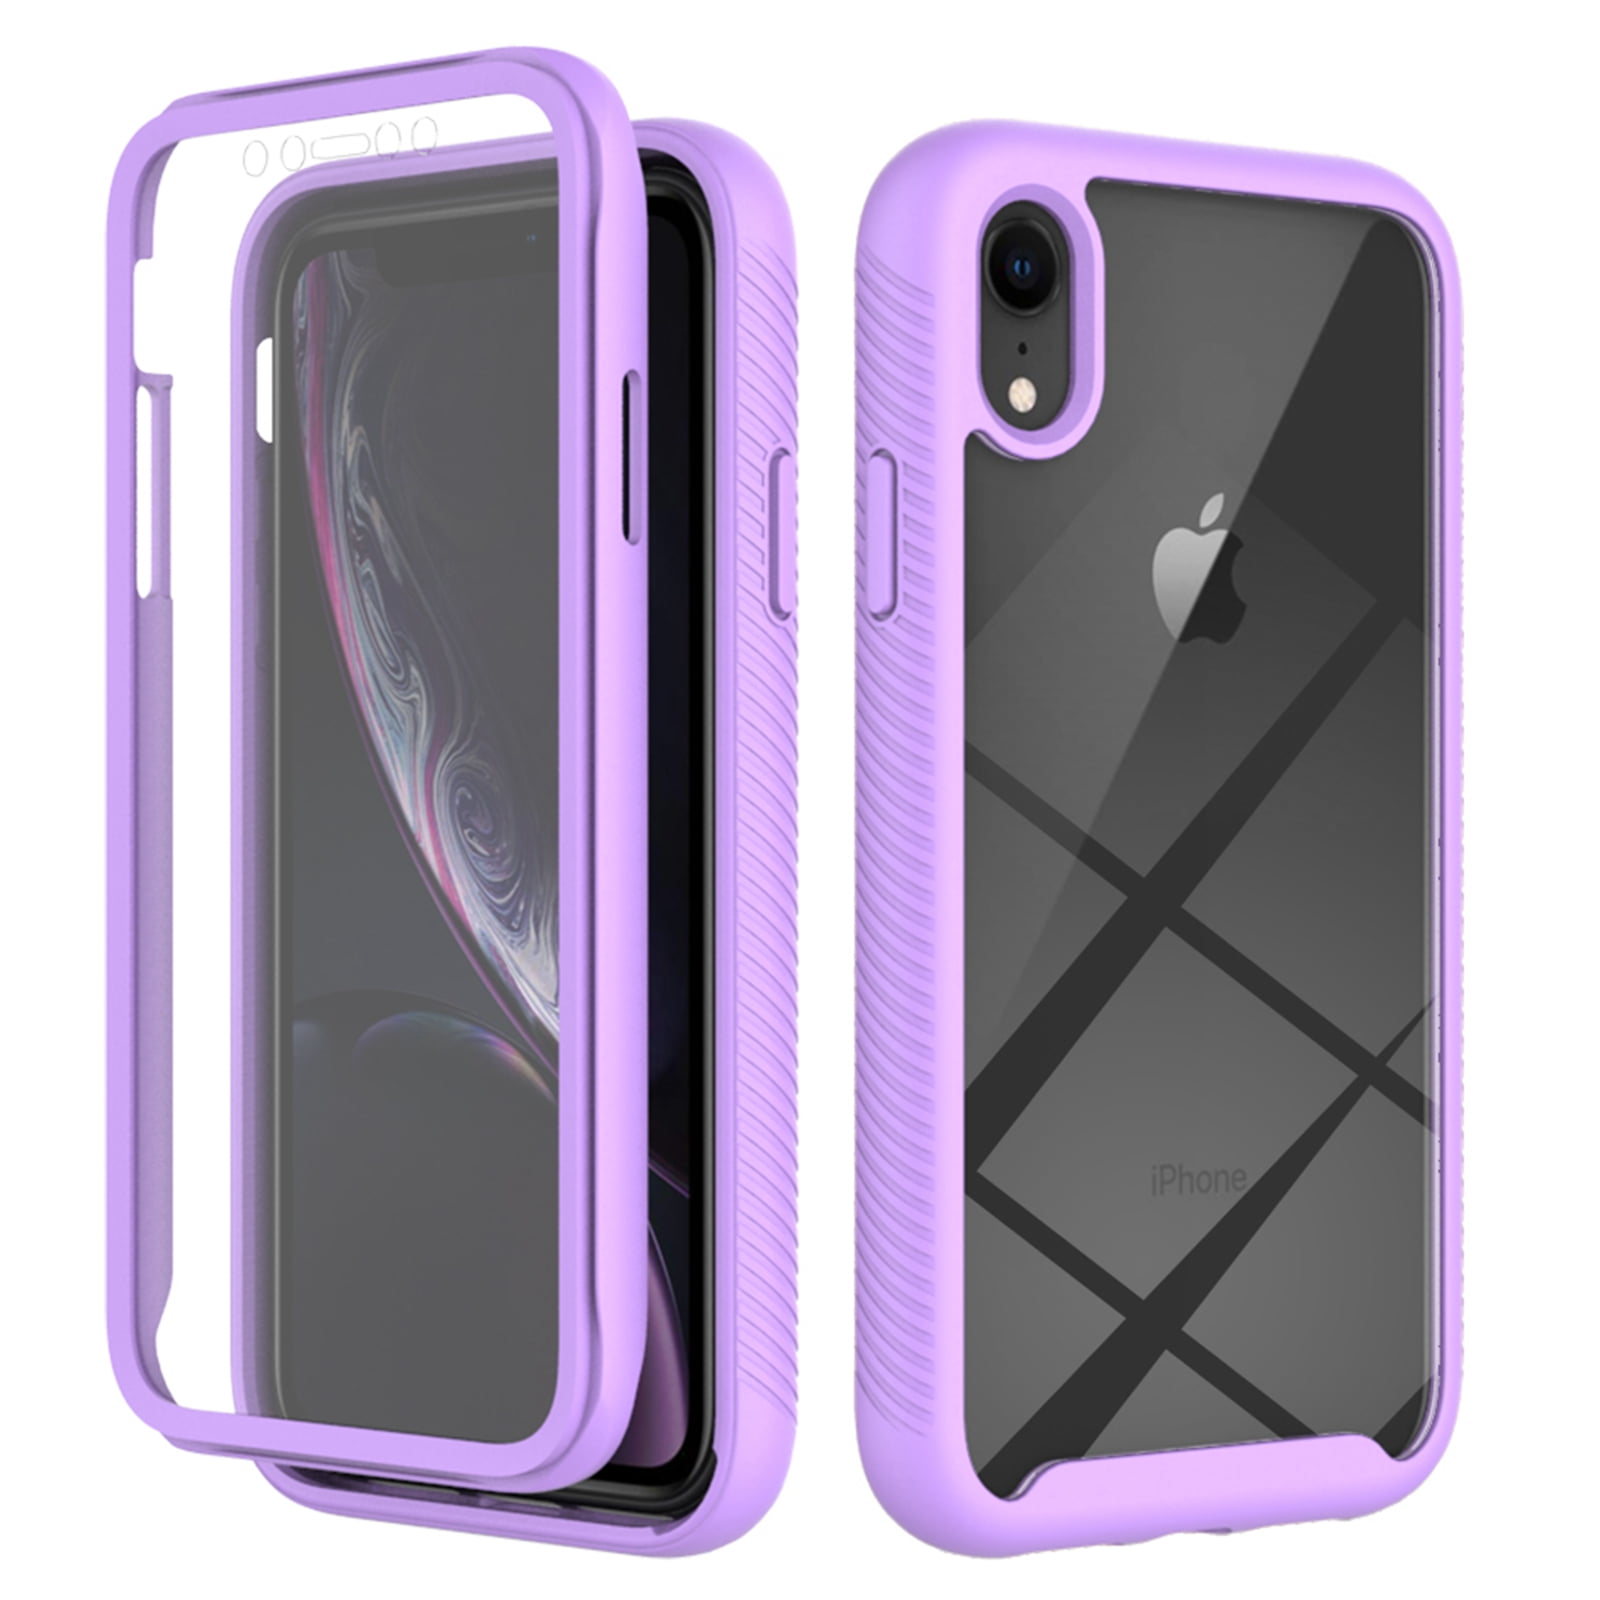 iPhone XR Case with Built in Screen Protector,Dteck Full-Body Shockproof  Rubber Hybrid Protection Crystal Clear PC Back Protective Phone Case Cover  for Apple iPhone XR,Pink 